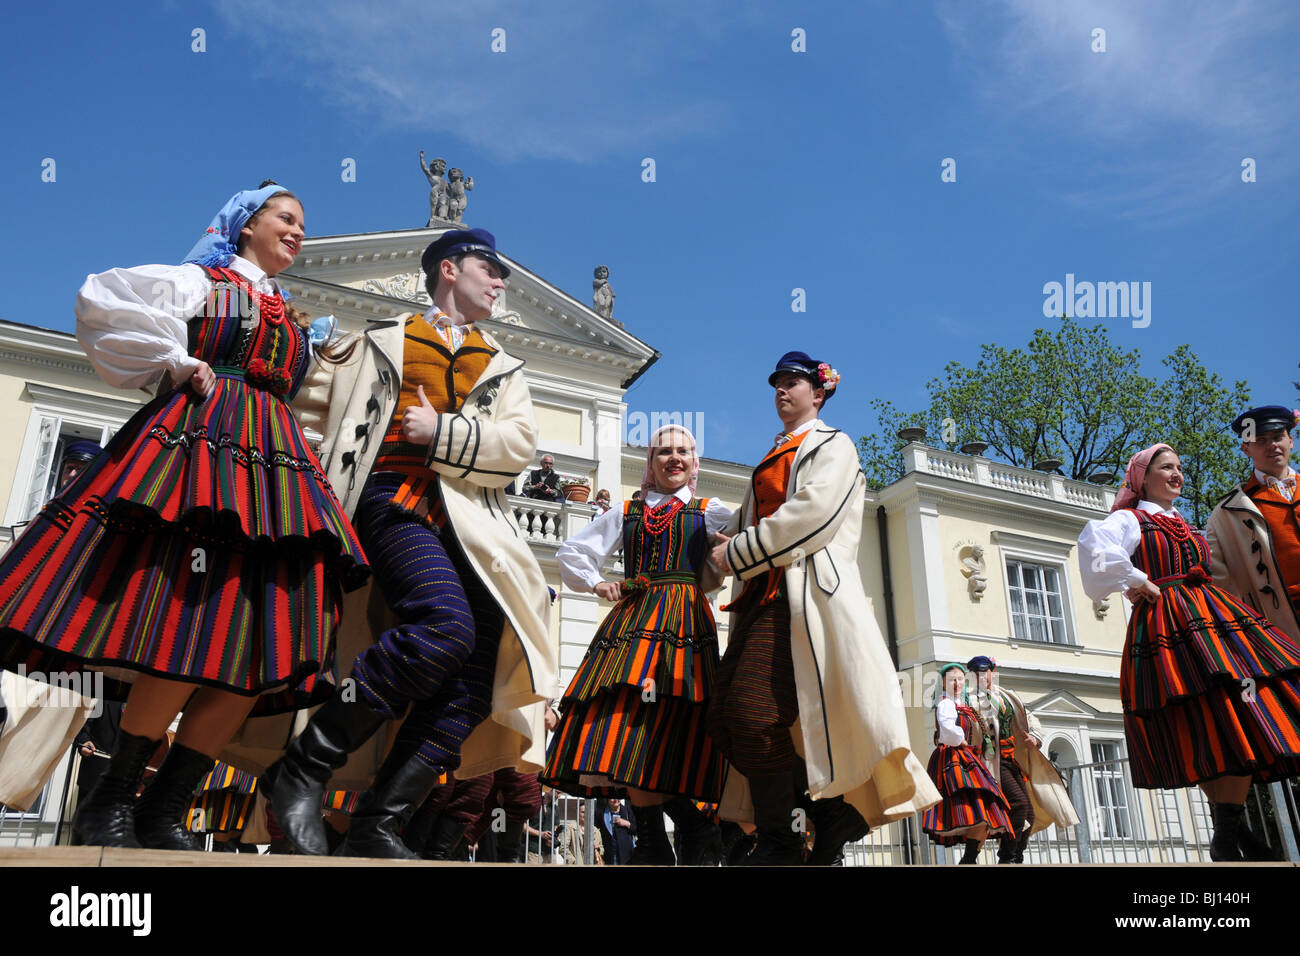 The Zofia Solarz 'Promni' Artistic Folk Dance Ensemble from Warsaw Agricultural University during their show Stock Photo